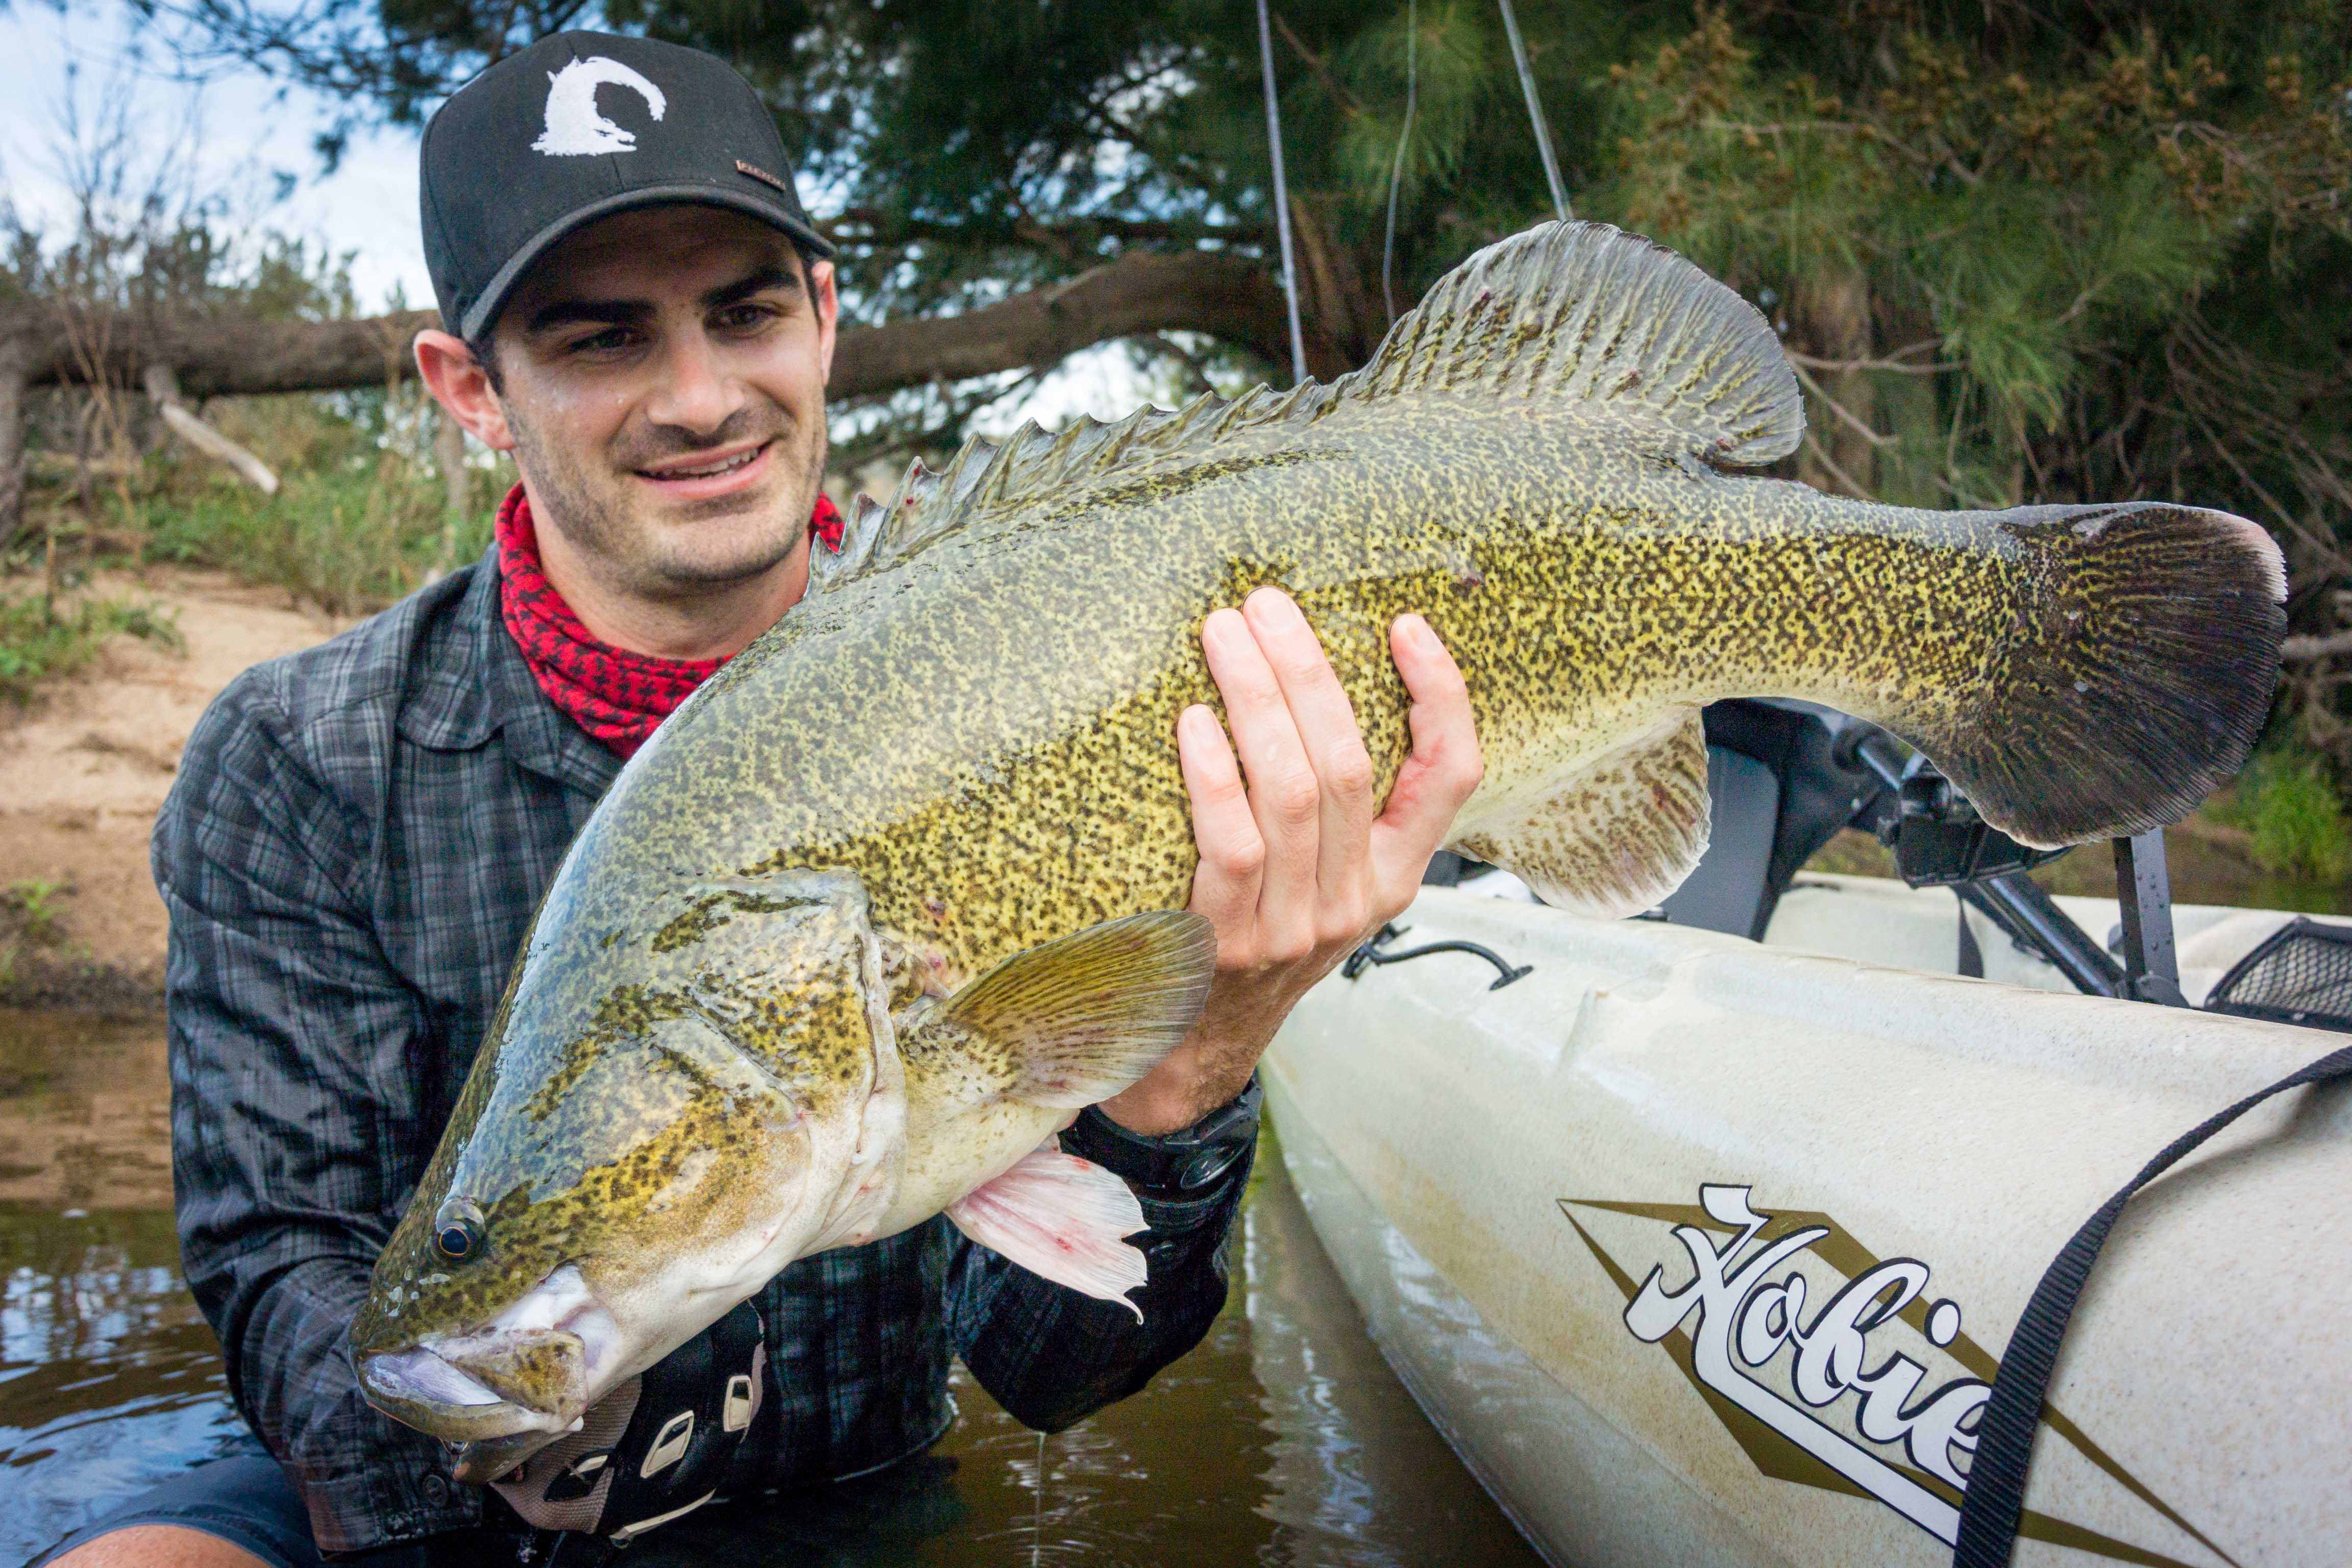 Aaron Holds a nice Murray cod taken from his hobie Kayak